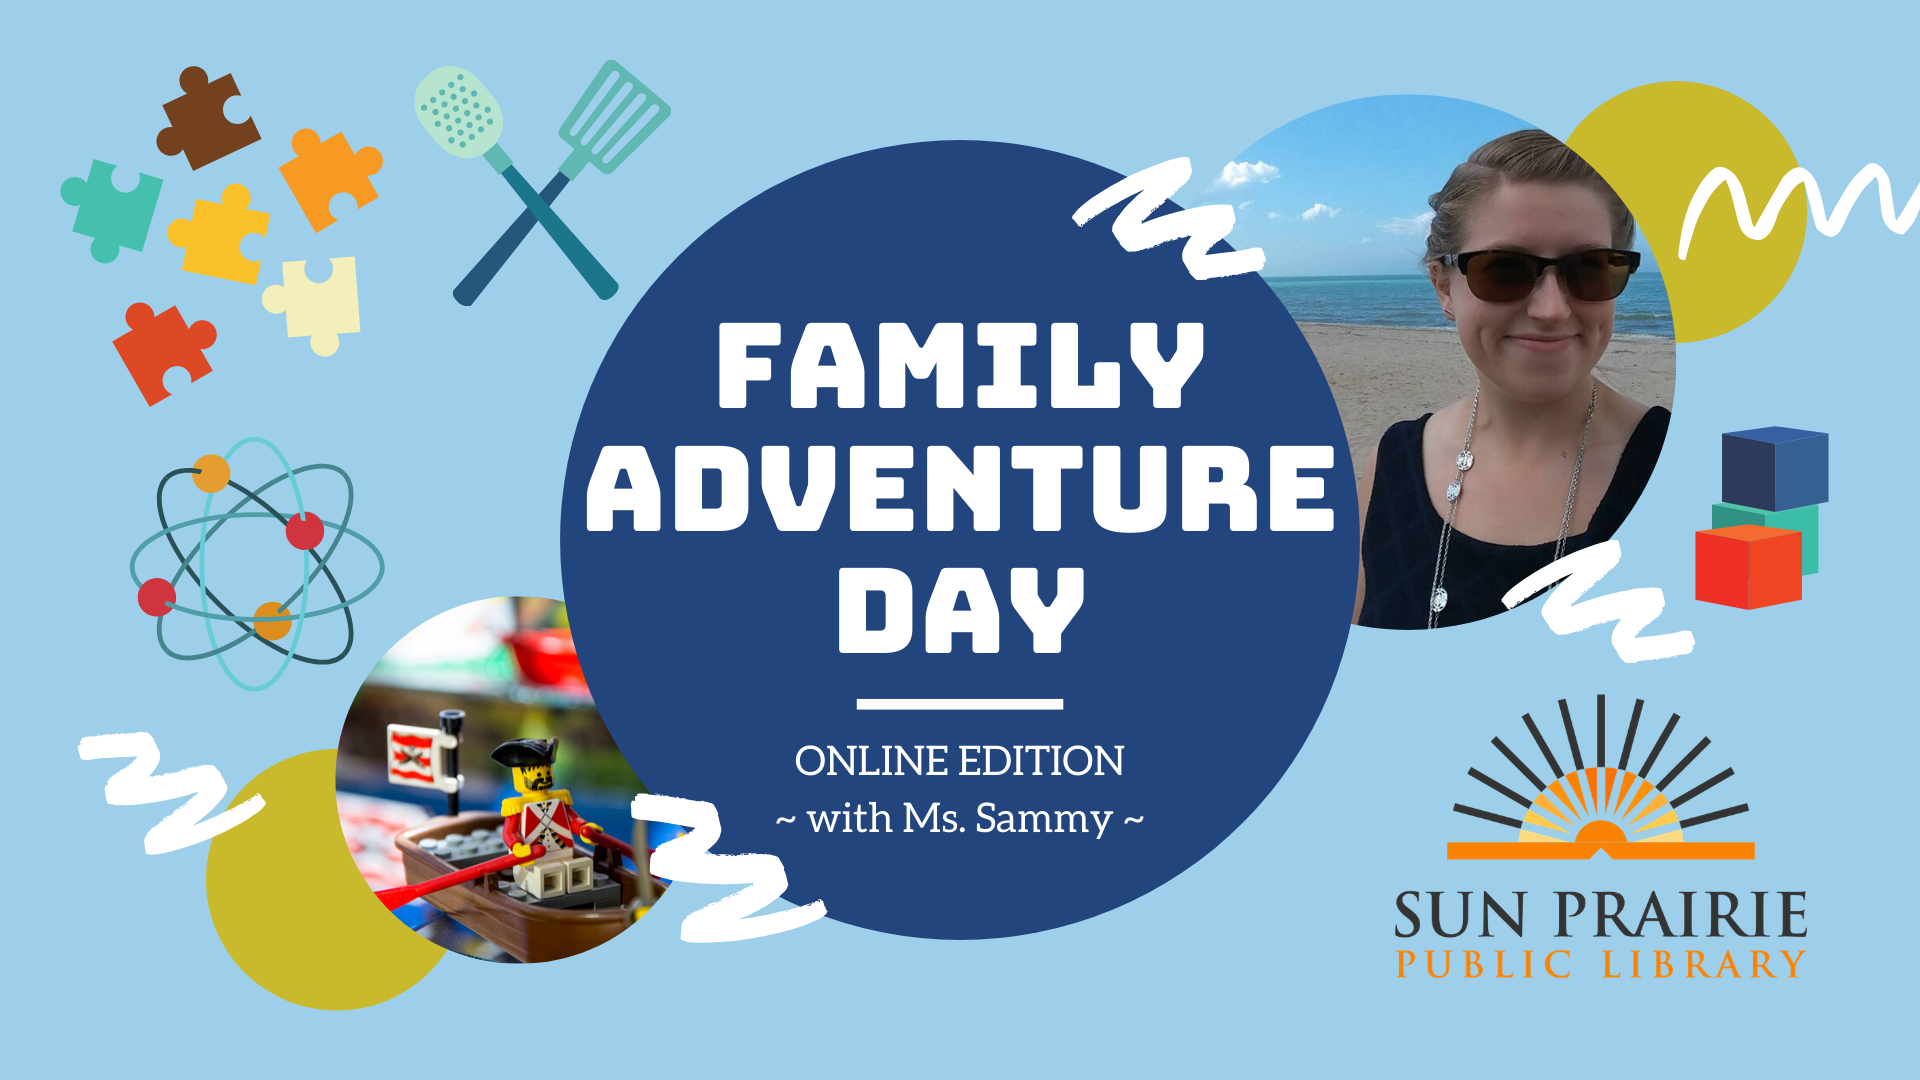 Family Adventure Day Online Edition with Ms. Sammy